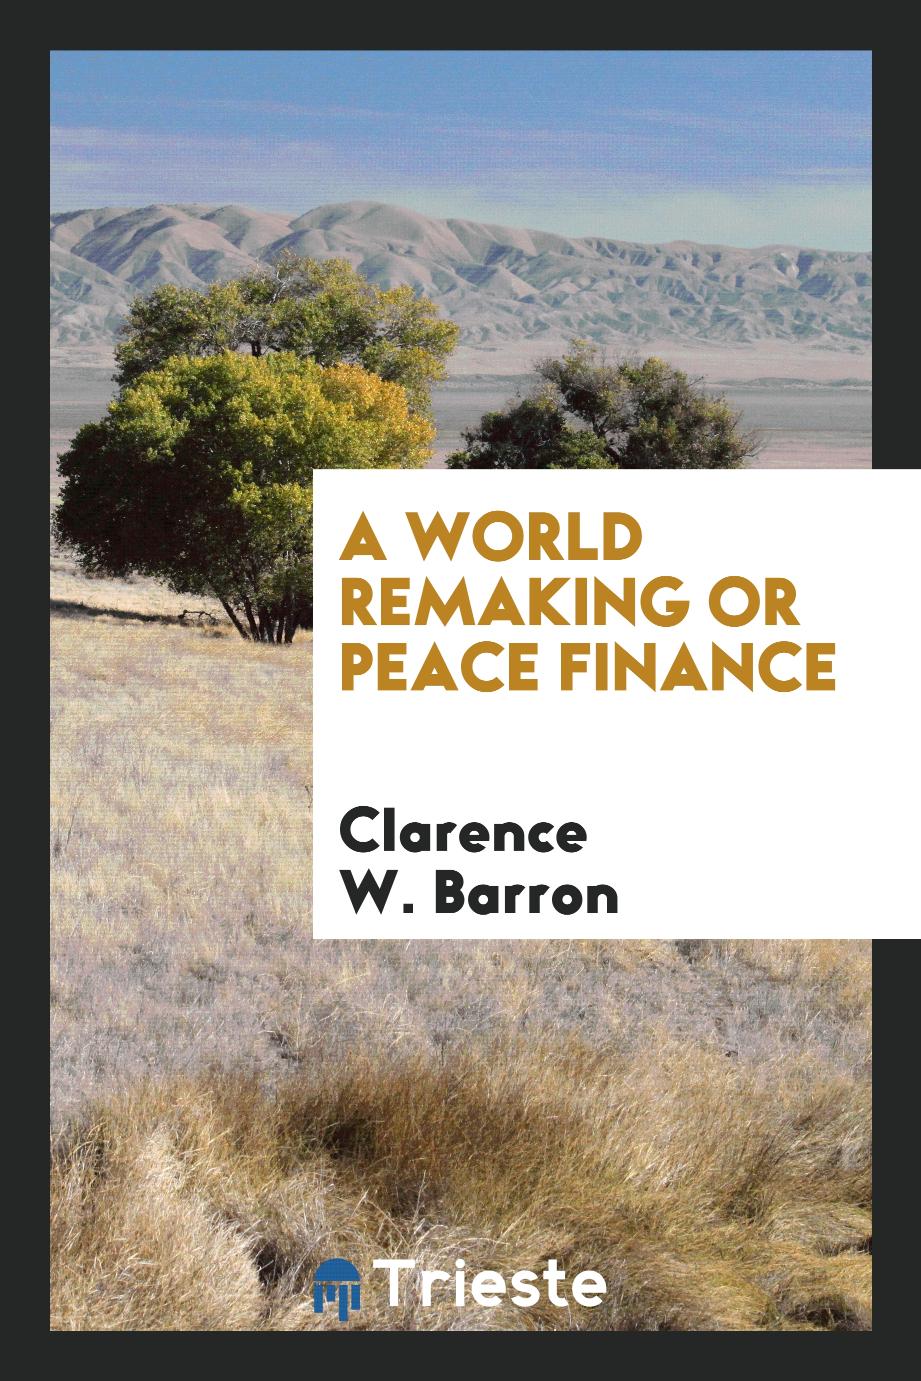 A world remaking or peace finance